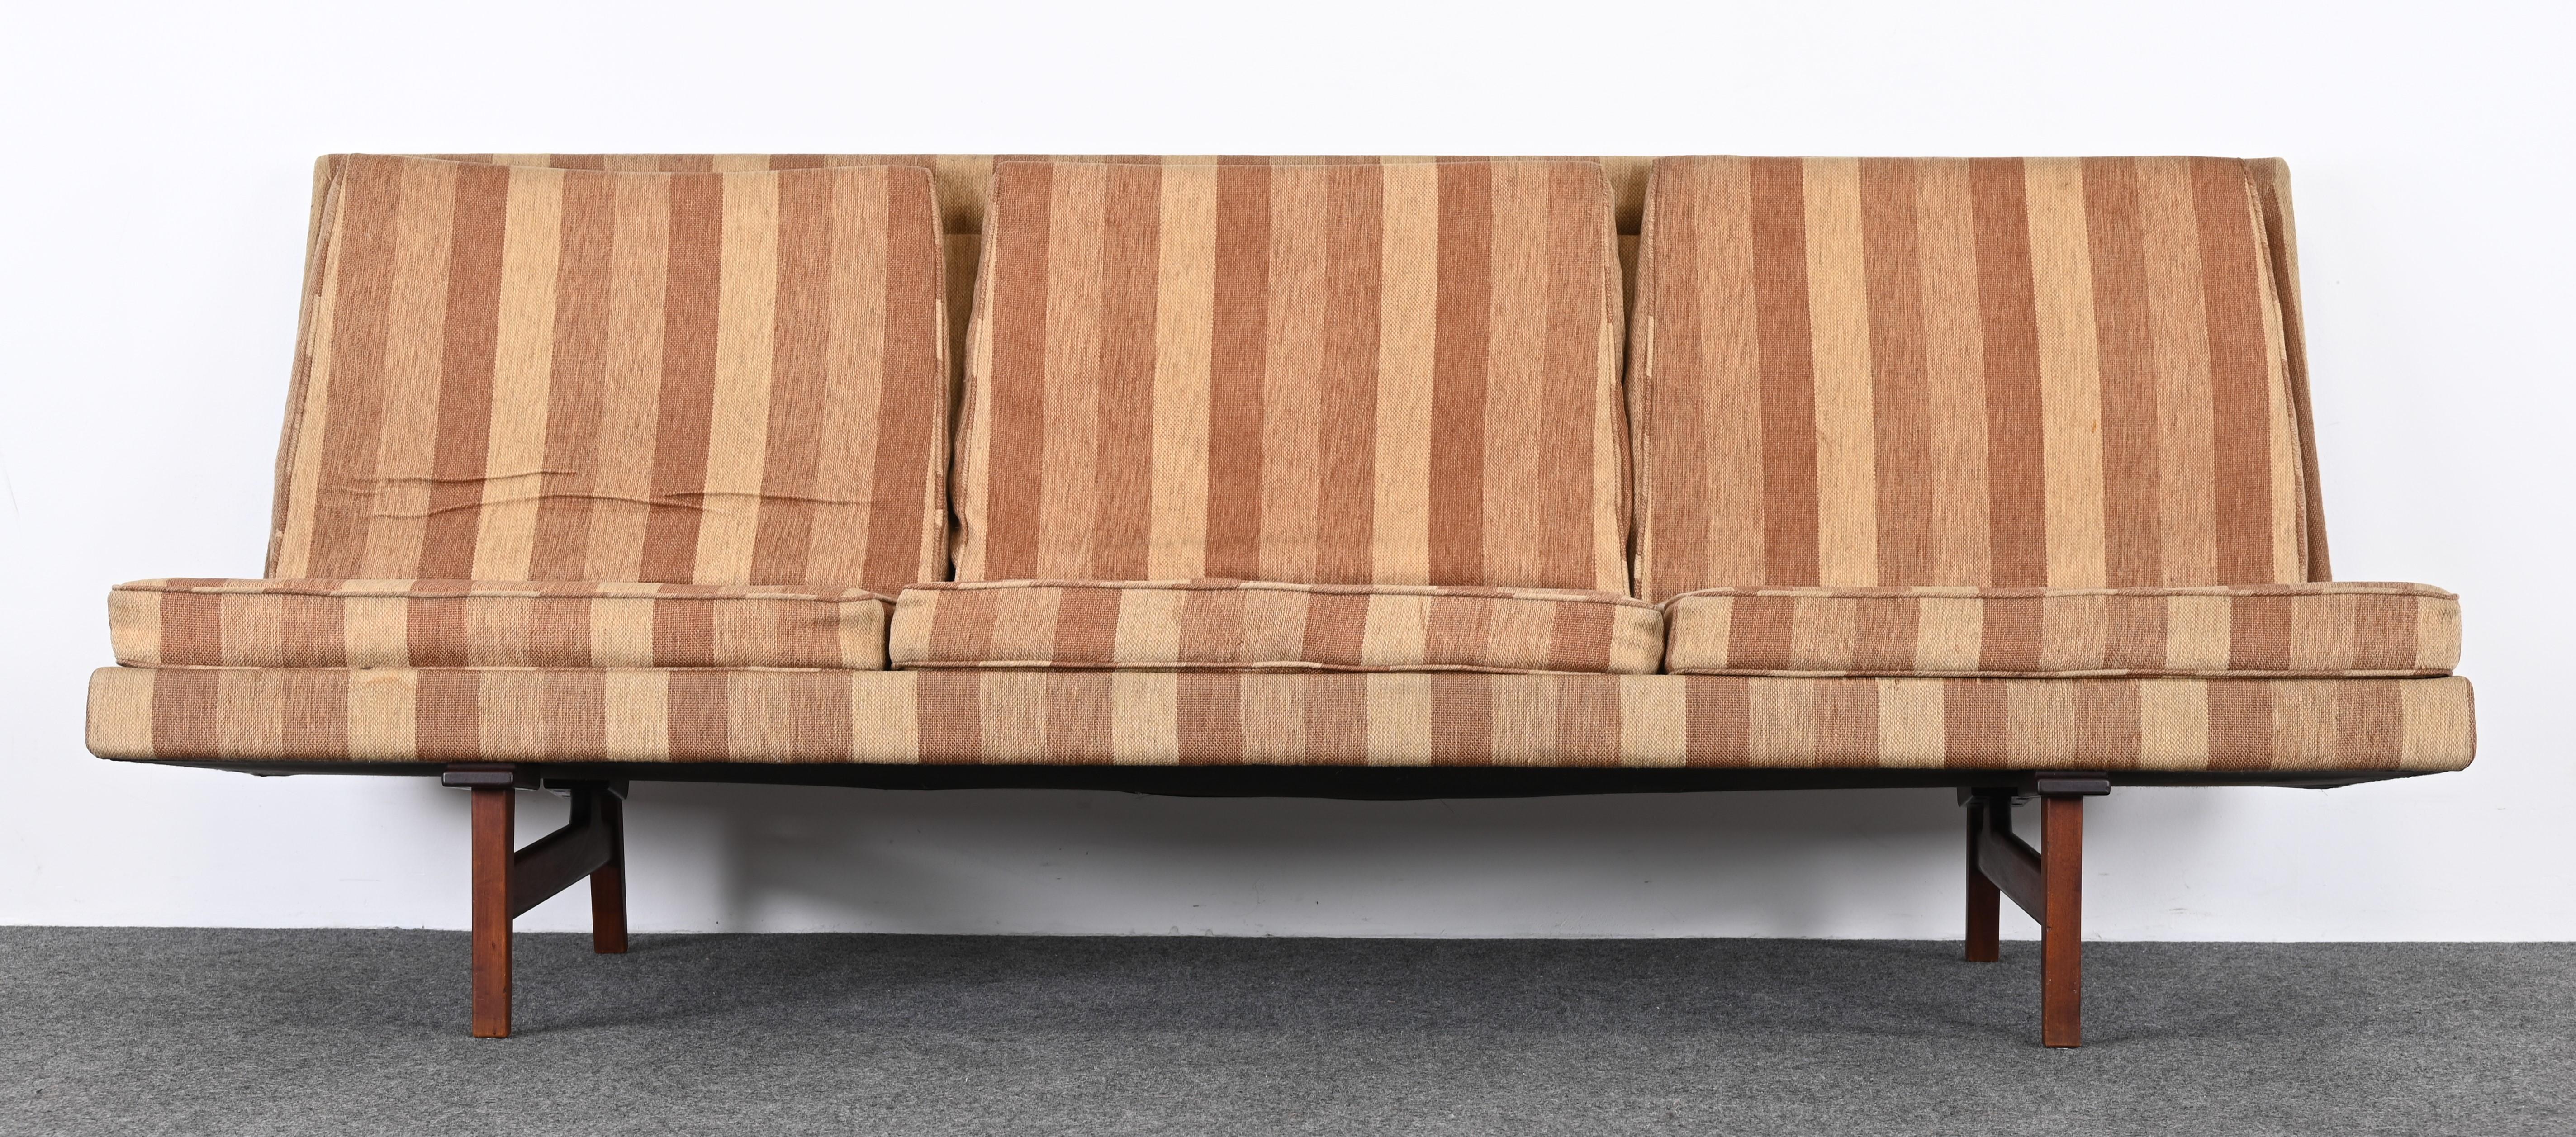 Upholstery Chair and Sofa by Jens Risom, 1950s